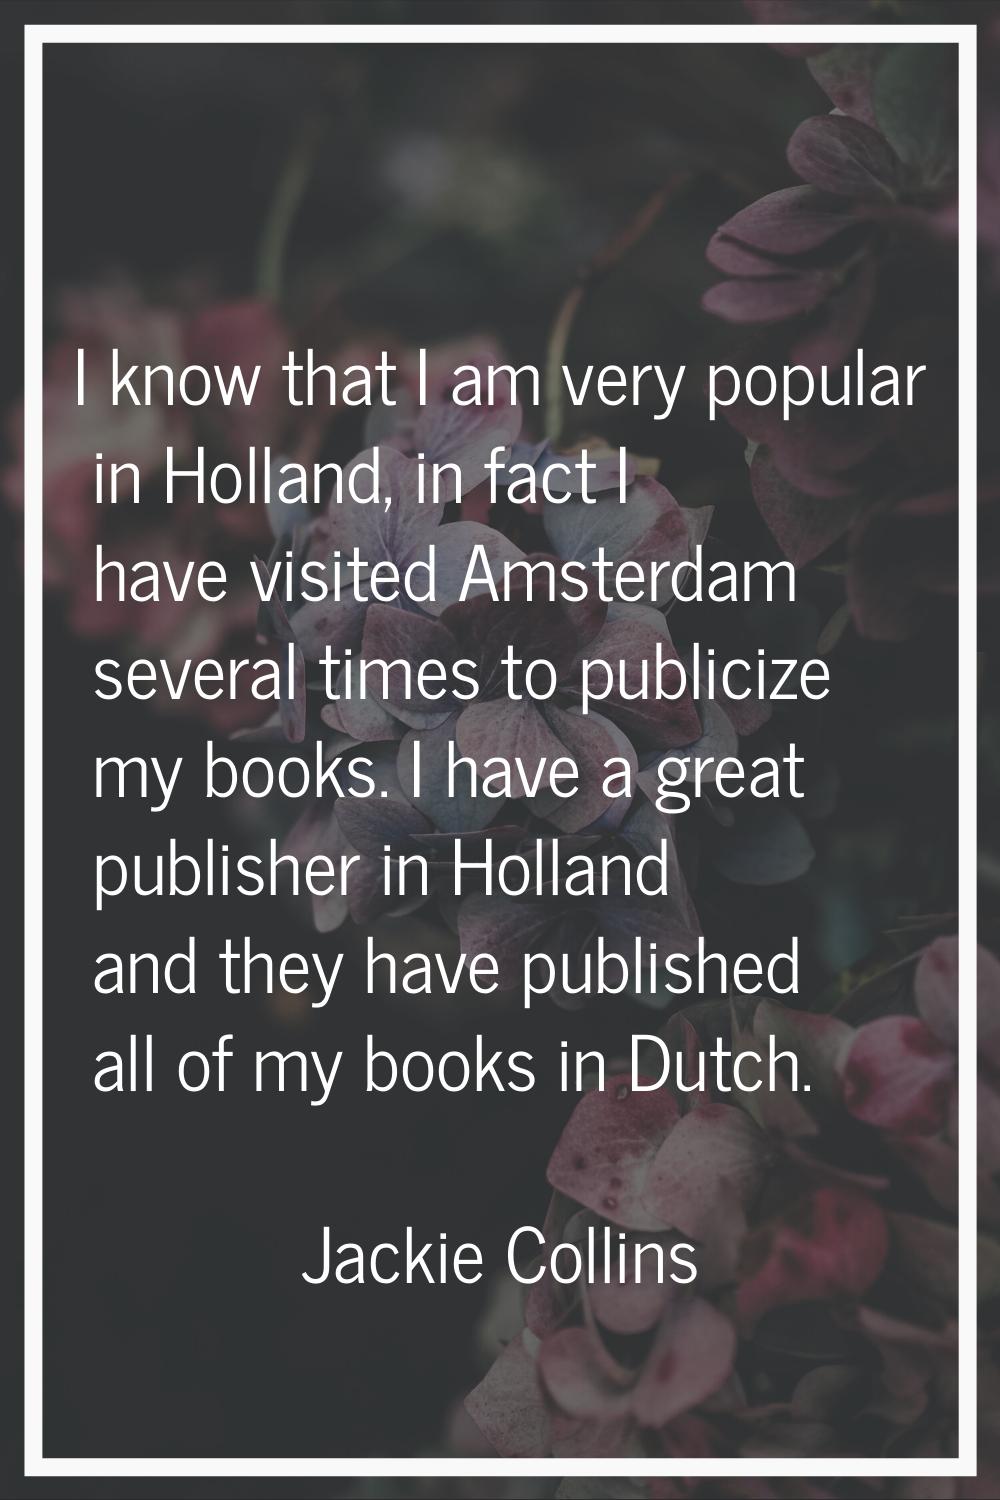 I know that I am very popular in Holland, in fact I have visited Amsterdam several times to publici